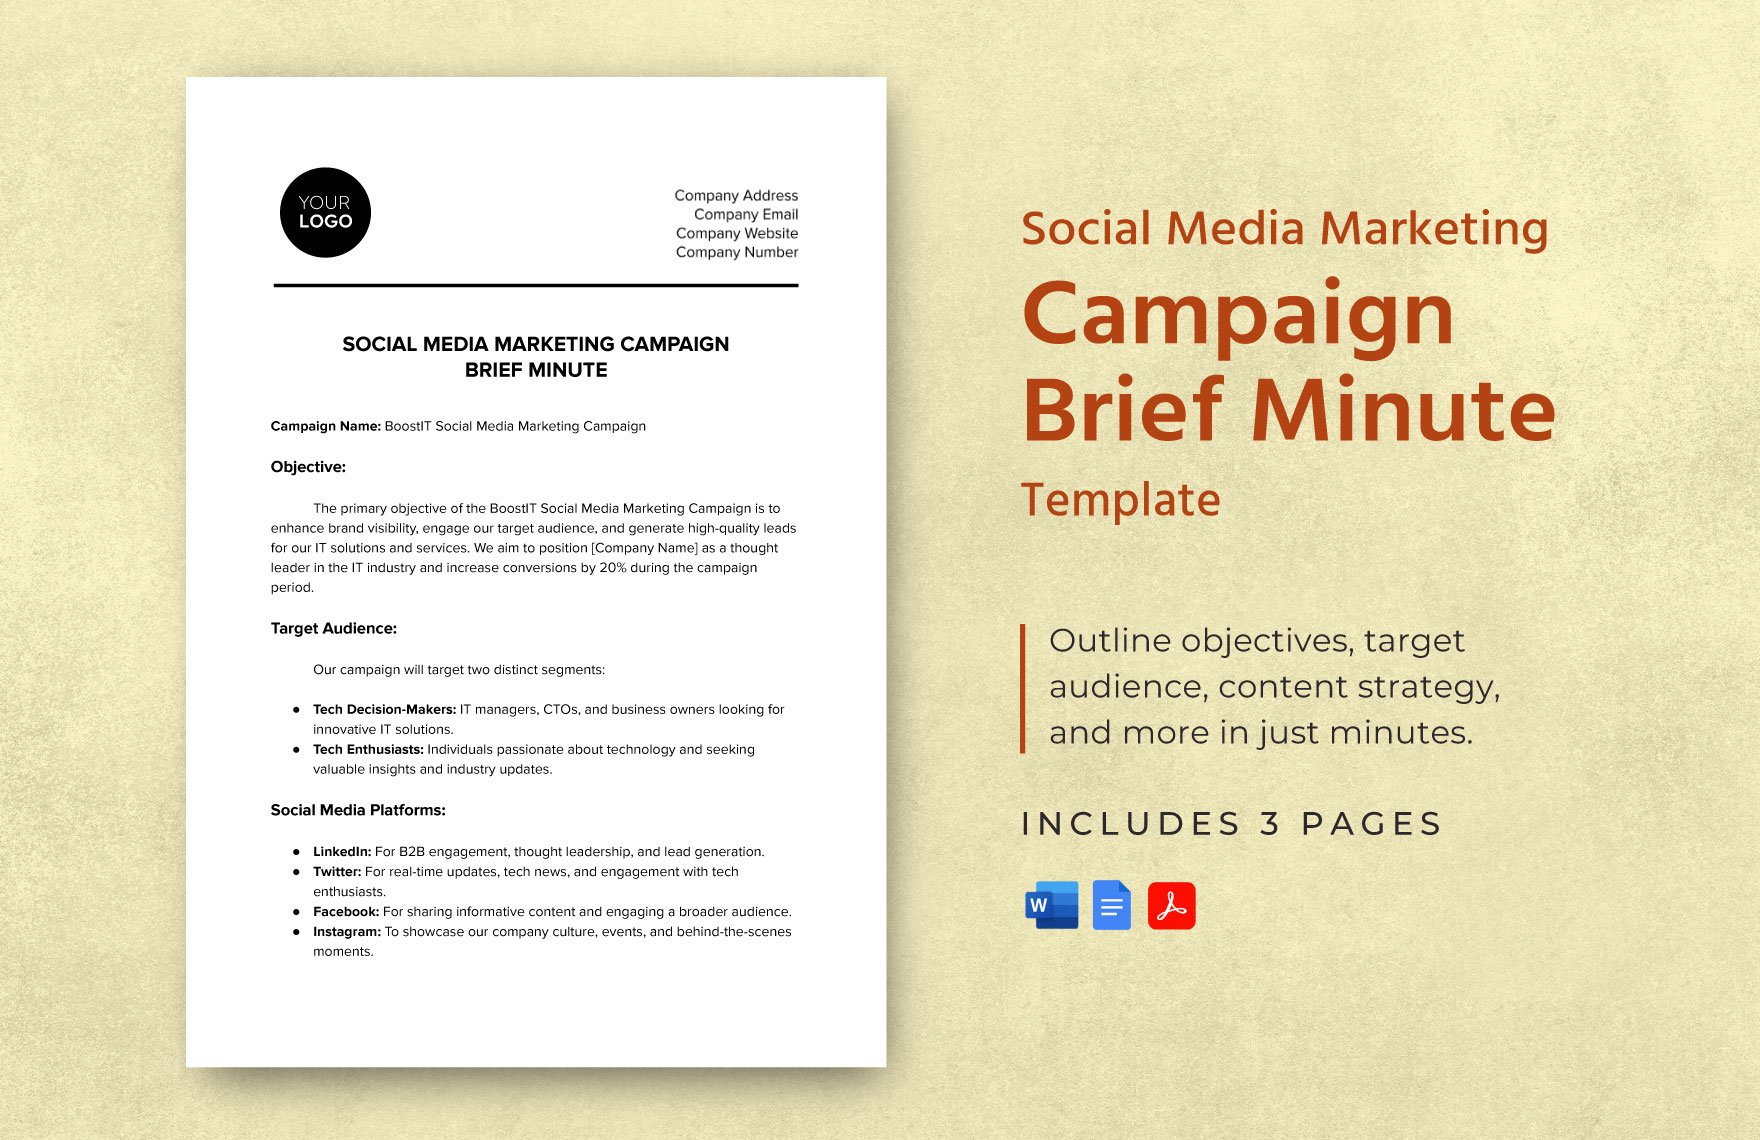 Social Media Marketing Campaign Brief Minute Template in Word, Google Docs, PDF